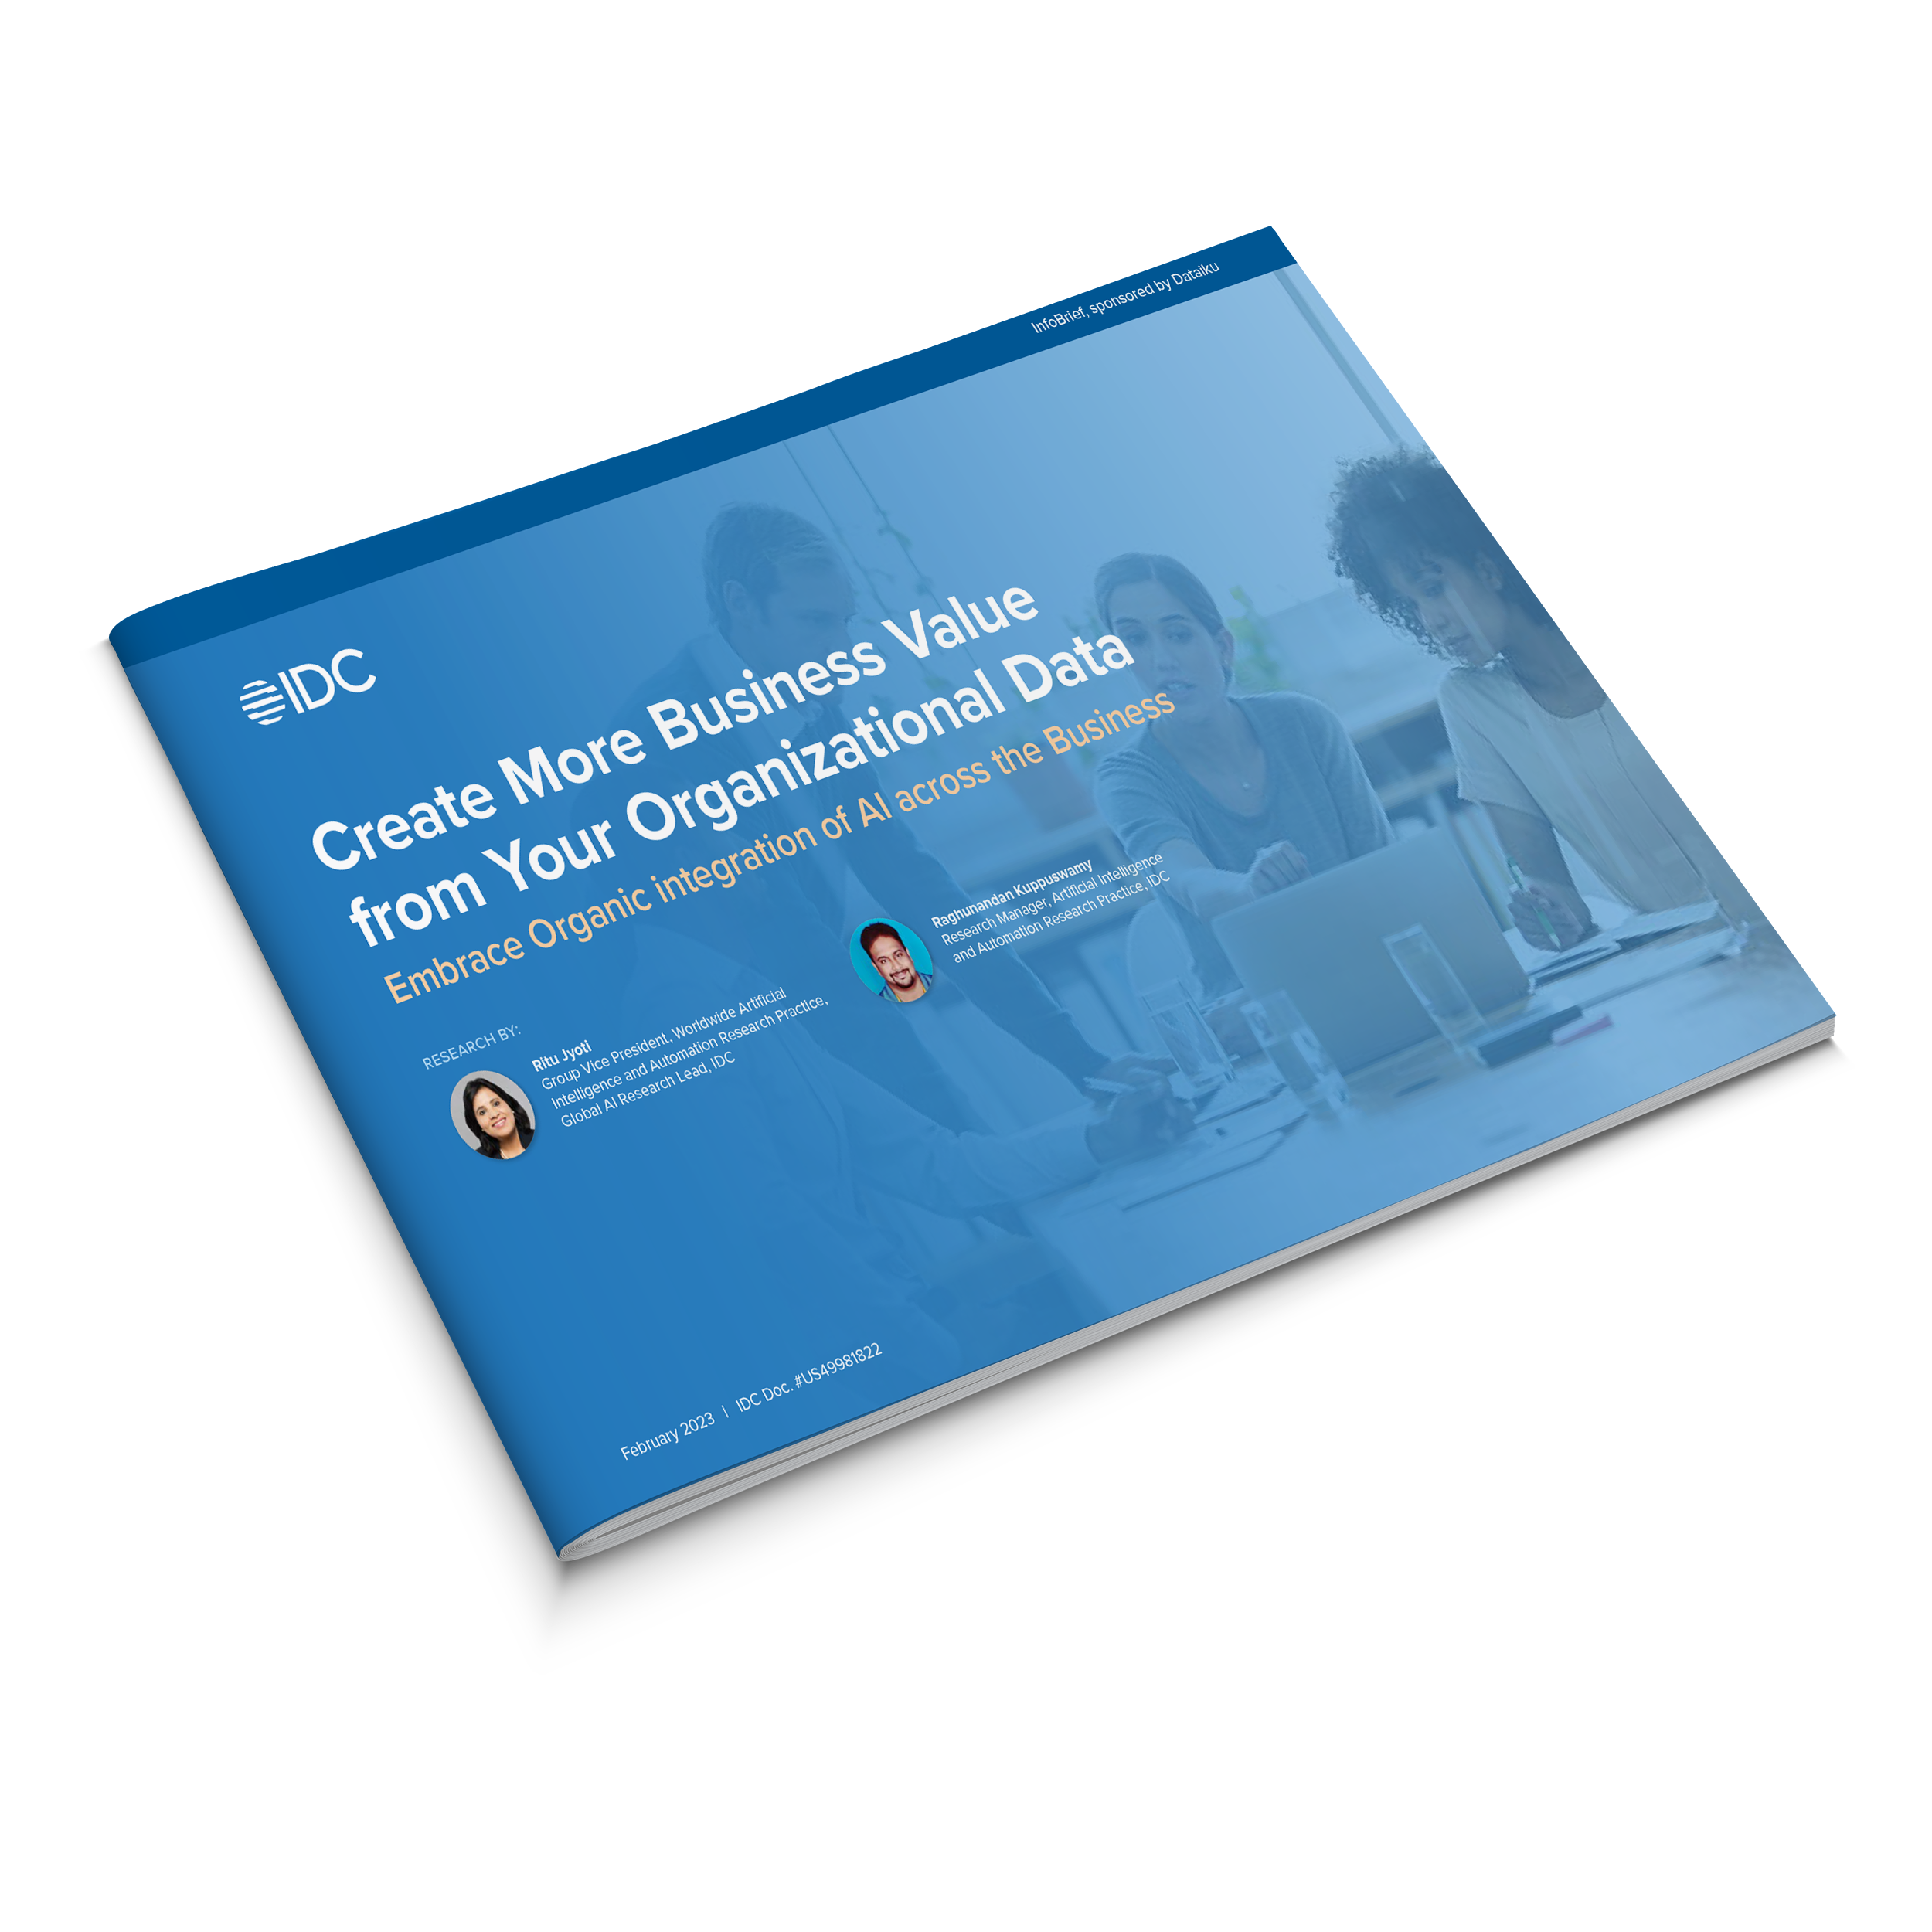 IDC InfoBrief Create More Business Value from Your Organizational Data Ebook Mockup